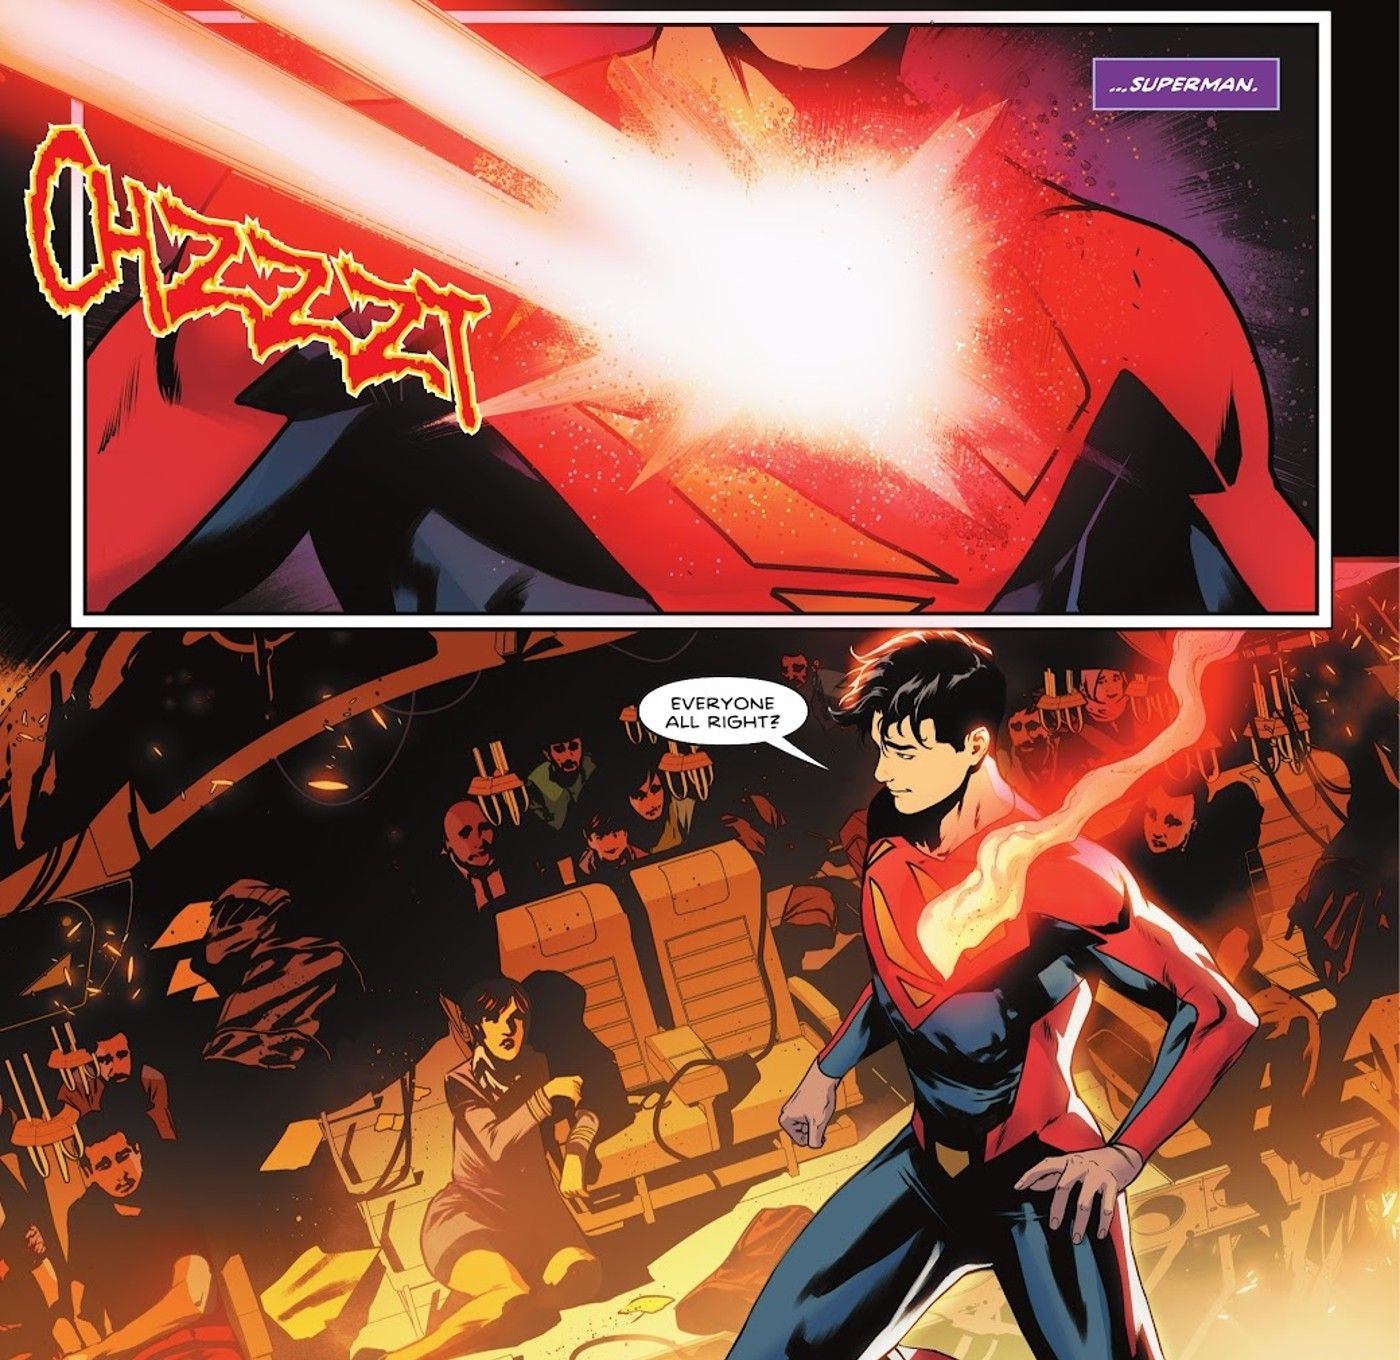 Comic book panels: Superman Jon Kent saves a plane after being blasted by heat vision.